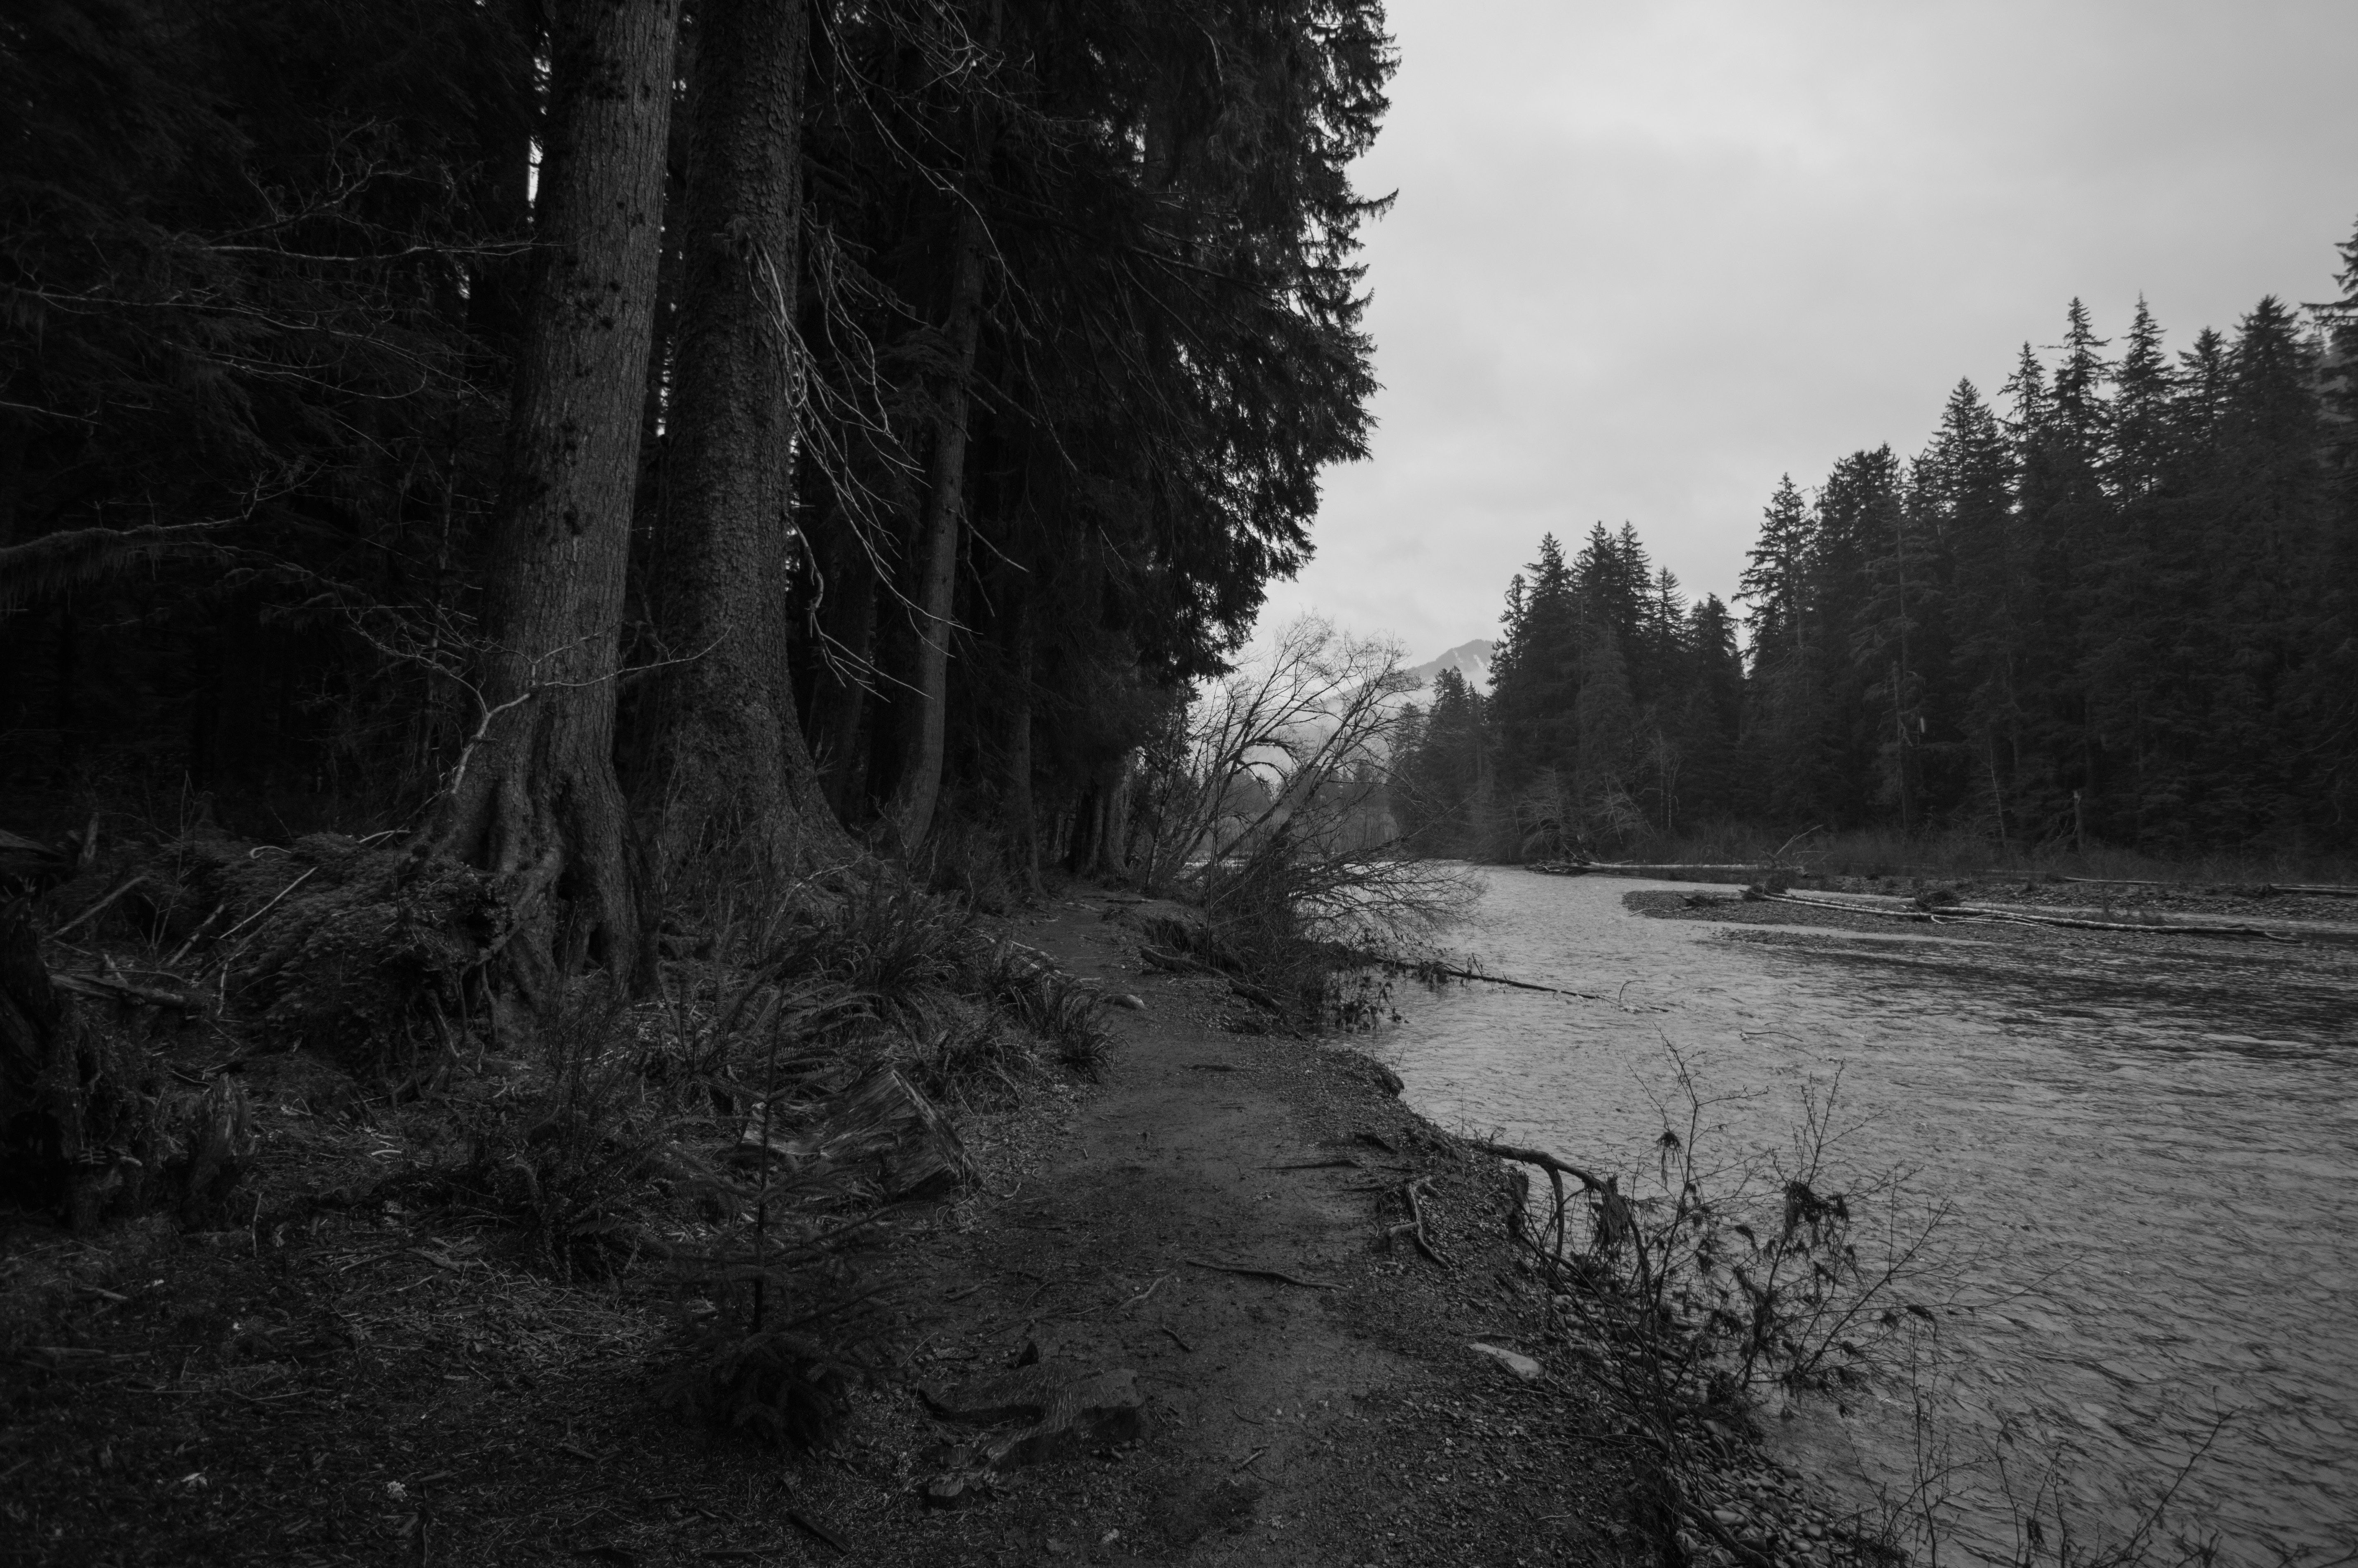 Black and white forest scene in Forks, WA